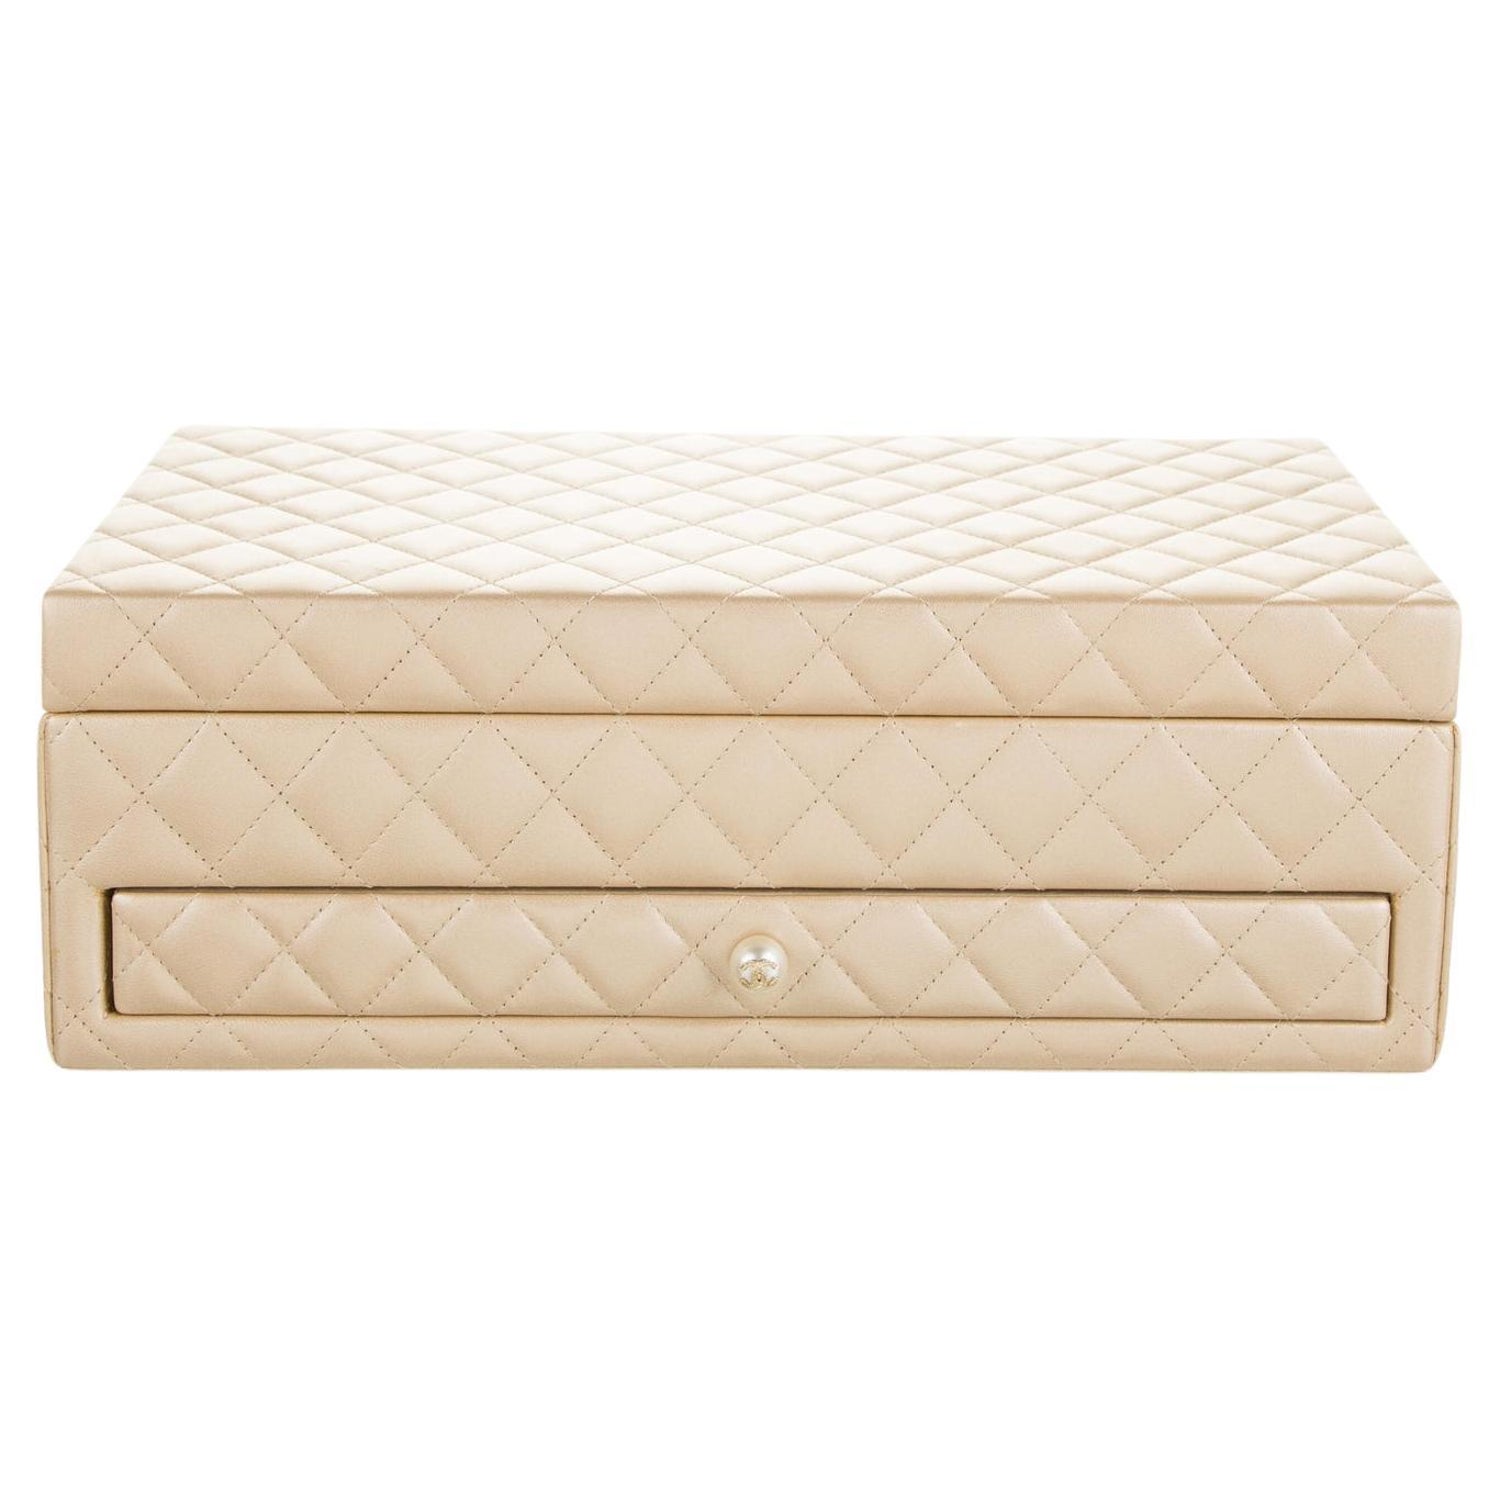 Chanel Quilted Jewelry Box: Luxurious Gift to Her